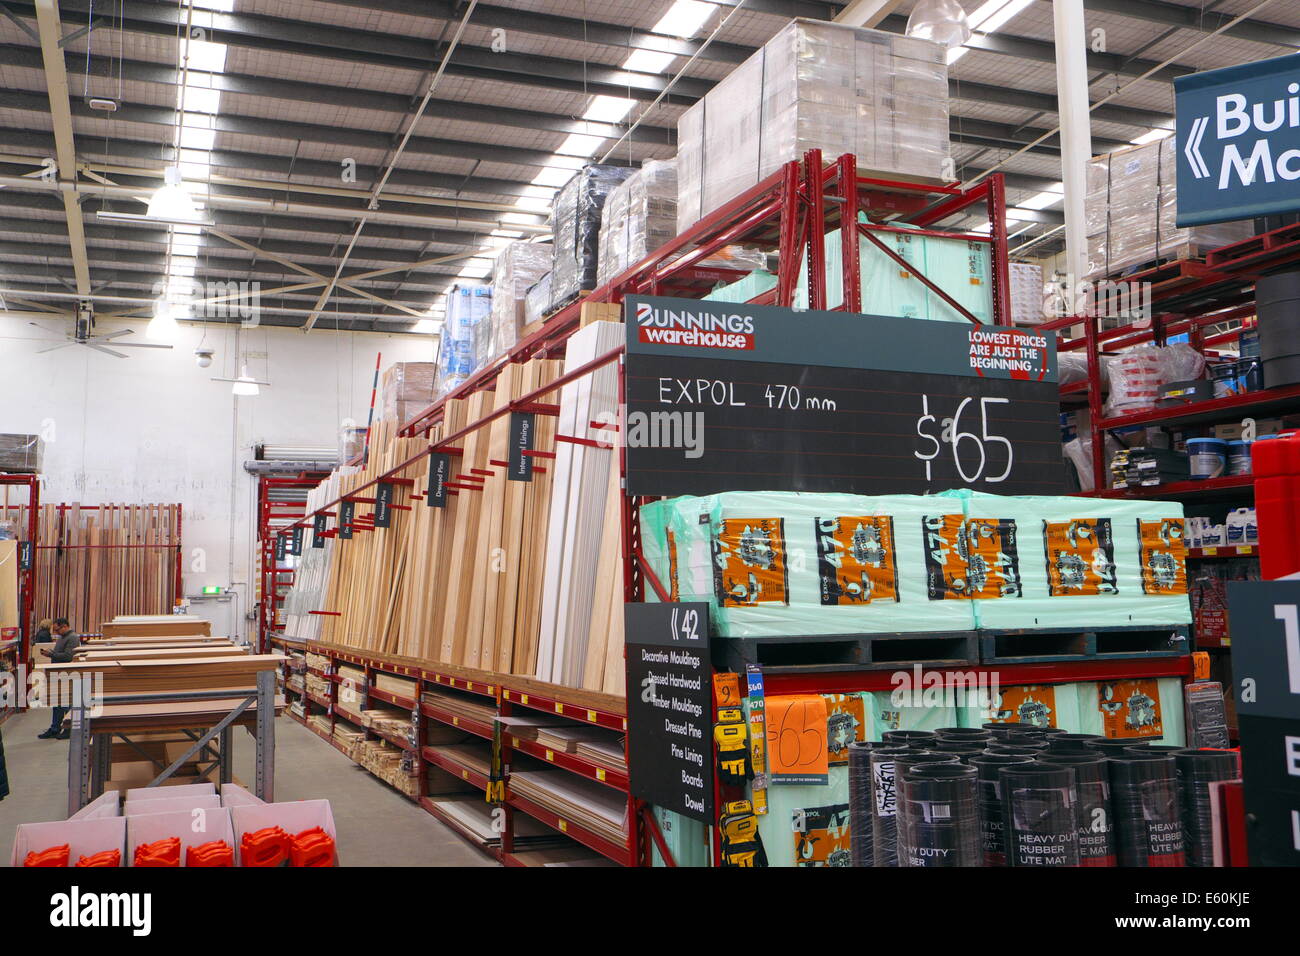 Bunnings is a national DIY retailer owned by wesfarmers, it sells tools, timber, equipment for builders and home owners, Sydney,Australia Stock Photo